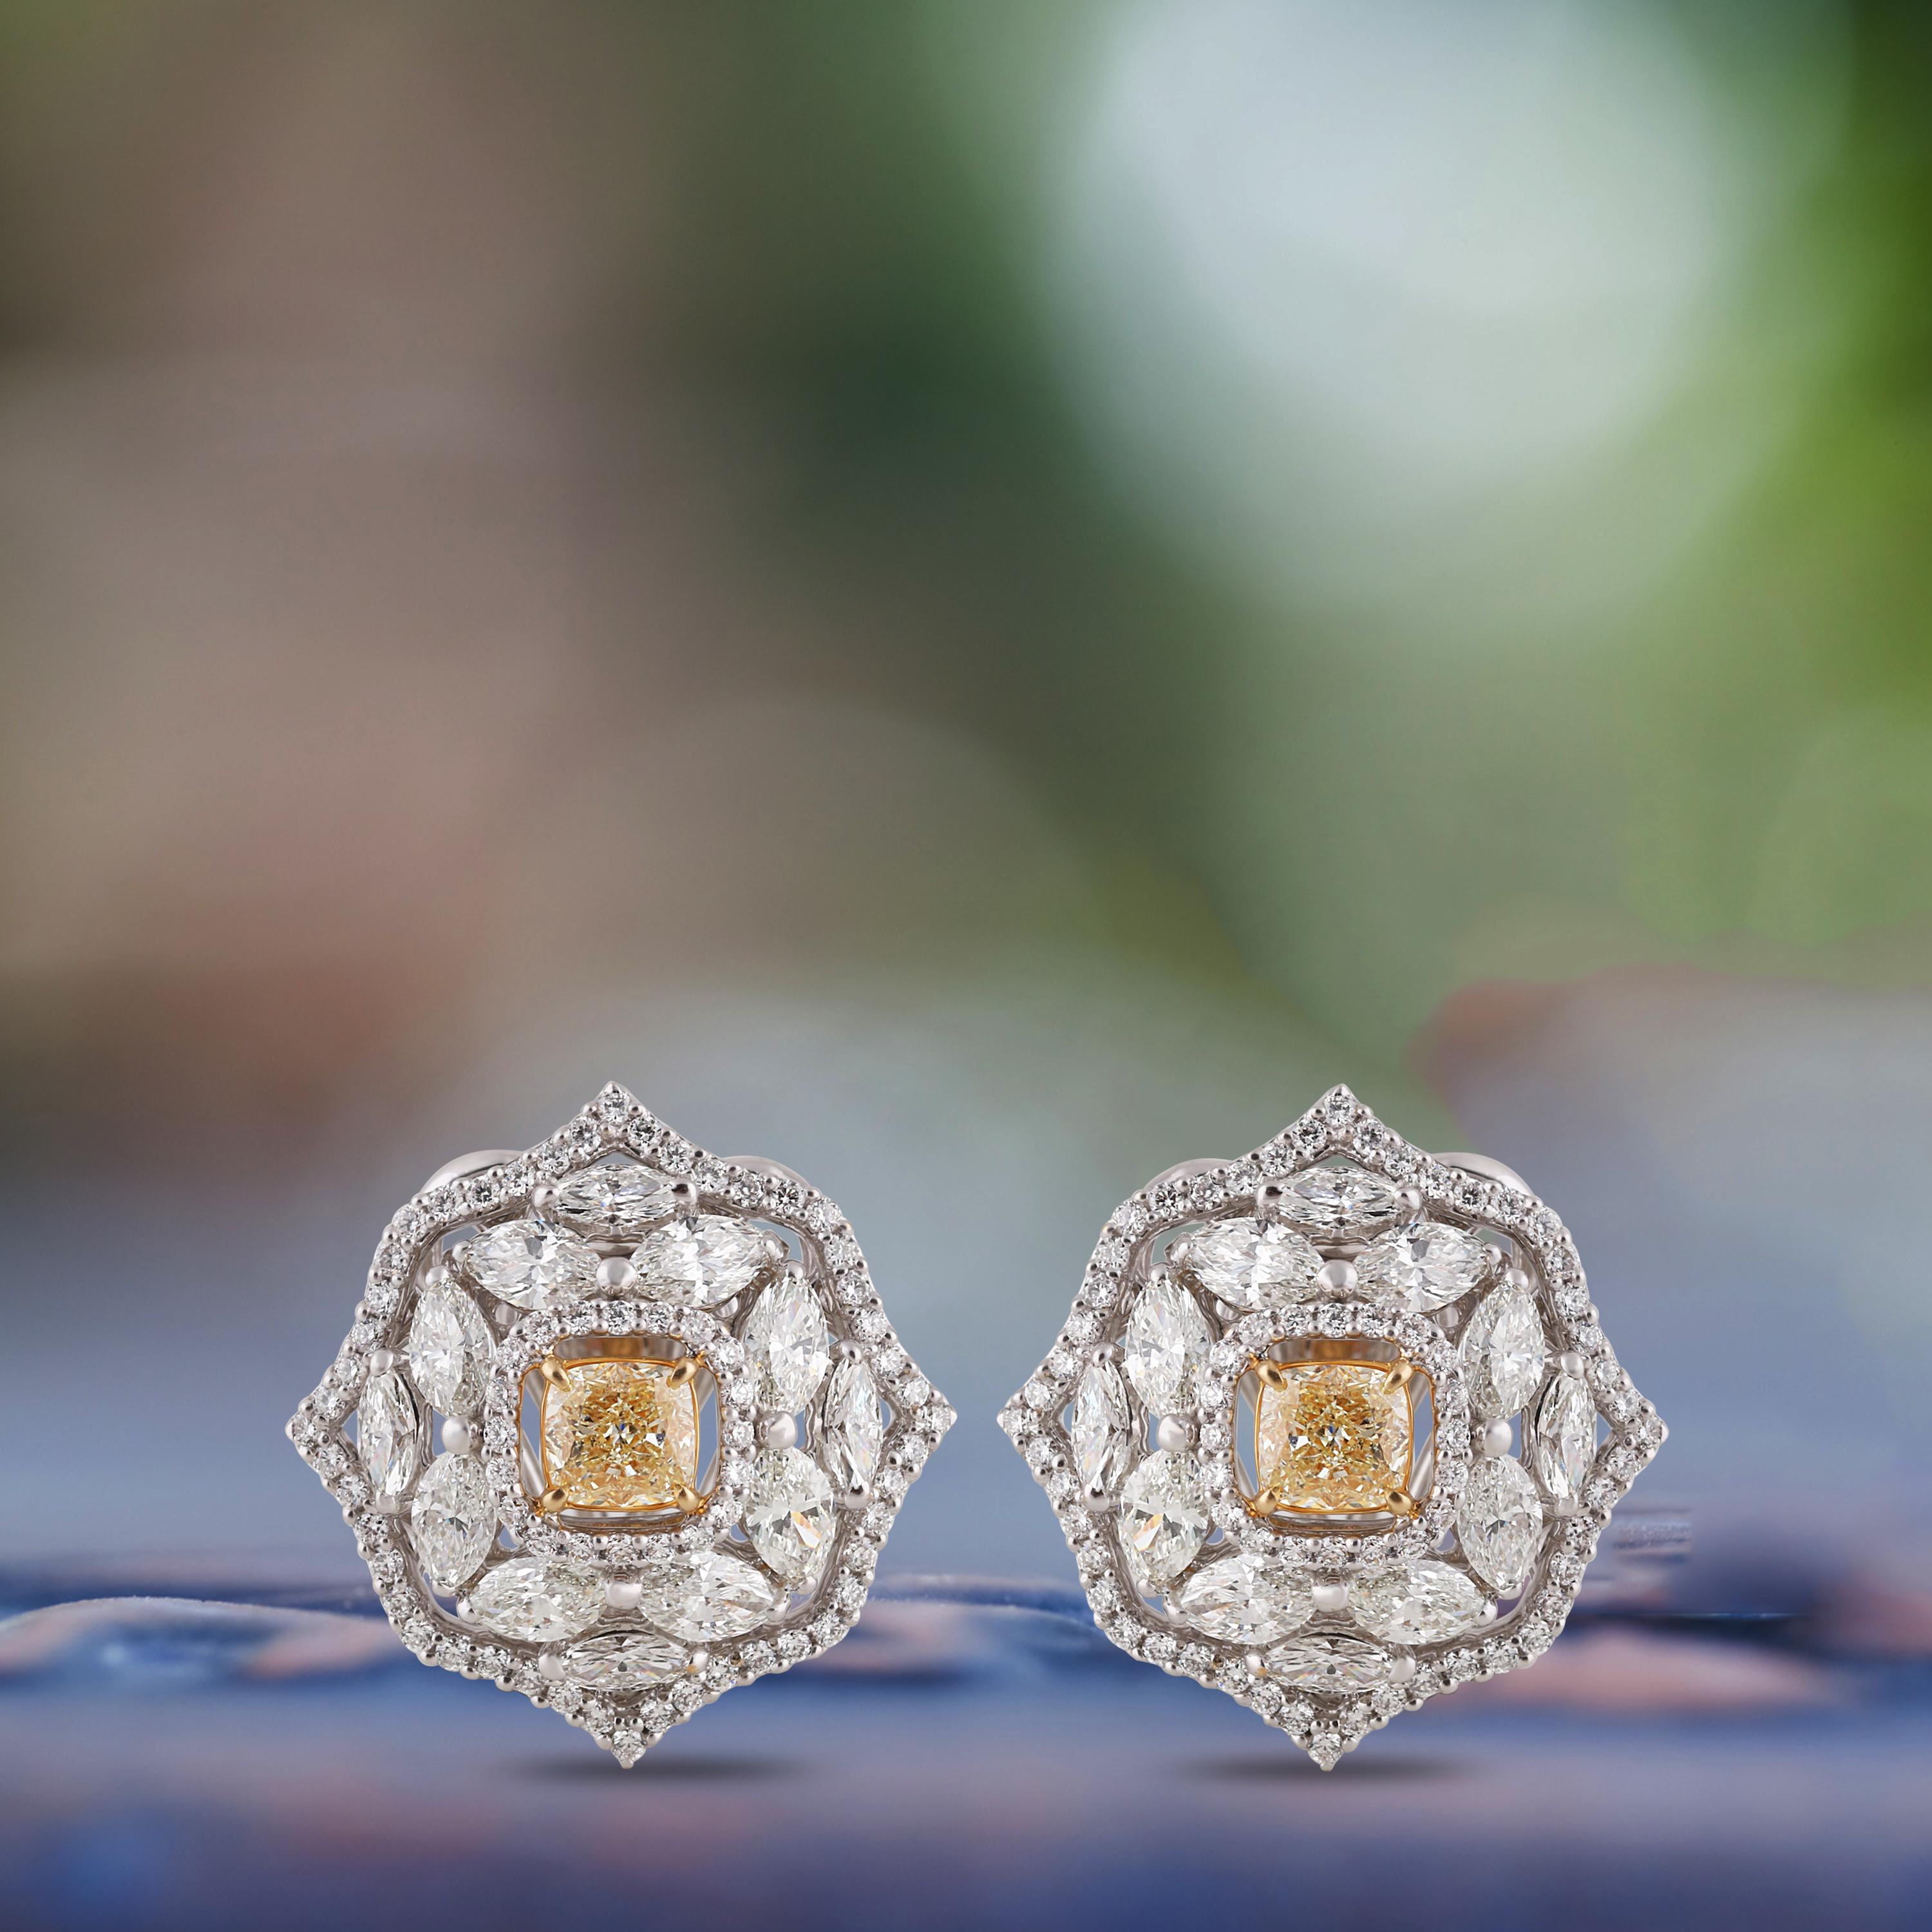 Studio Rêves Yellow Cushion Diamonds and White Diamonds Earrings in 18K Gold For Sale 3